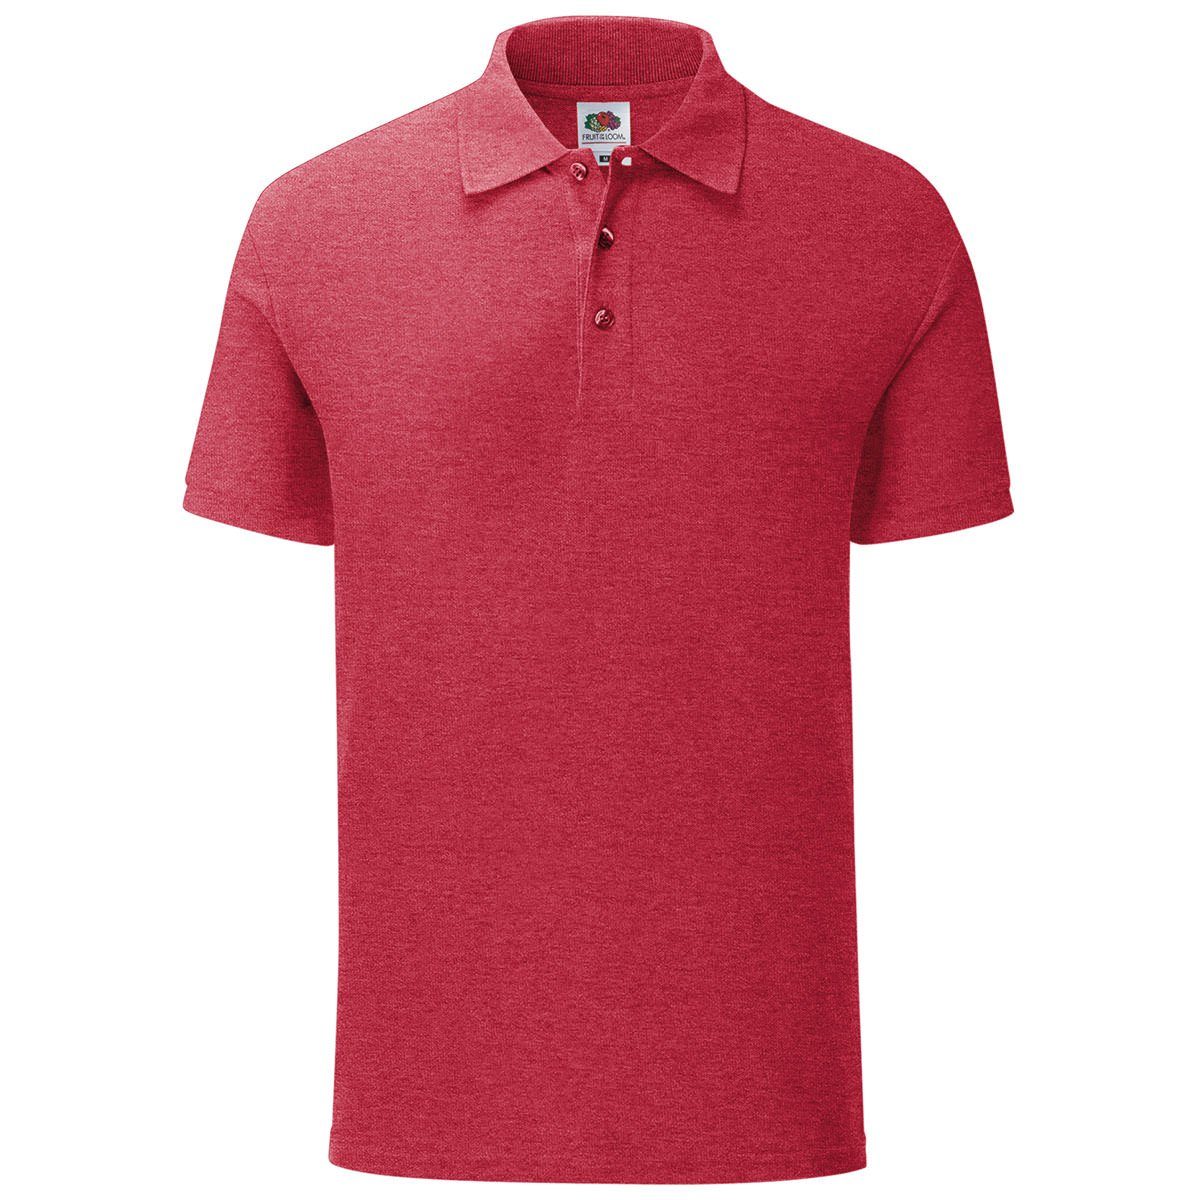 Fruit of the Loom Poloshirt Fruit of the Loom Iconic Polo vintage rot meliert